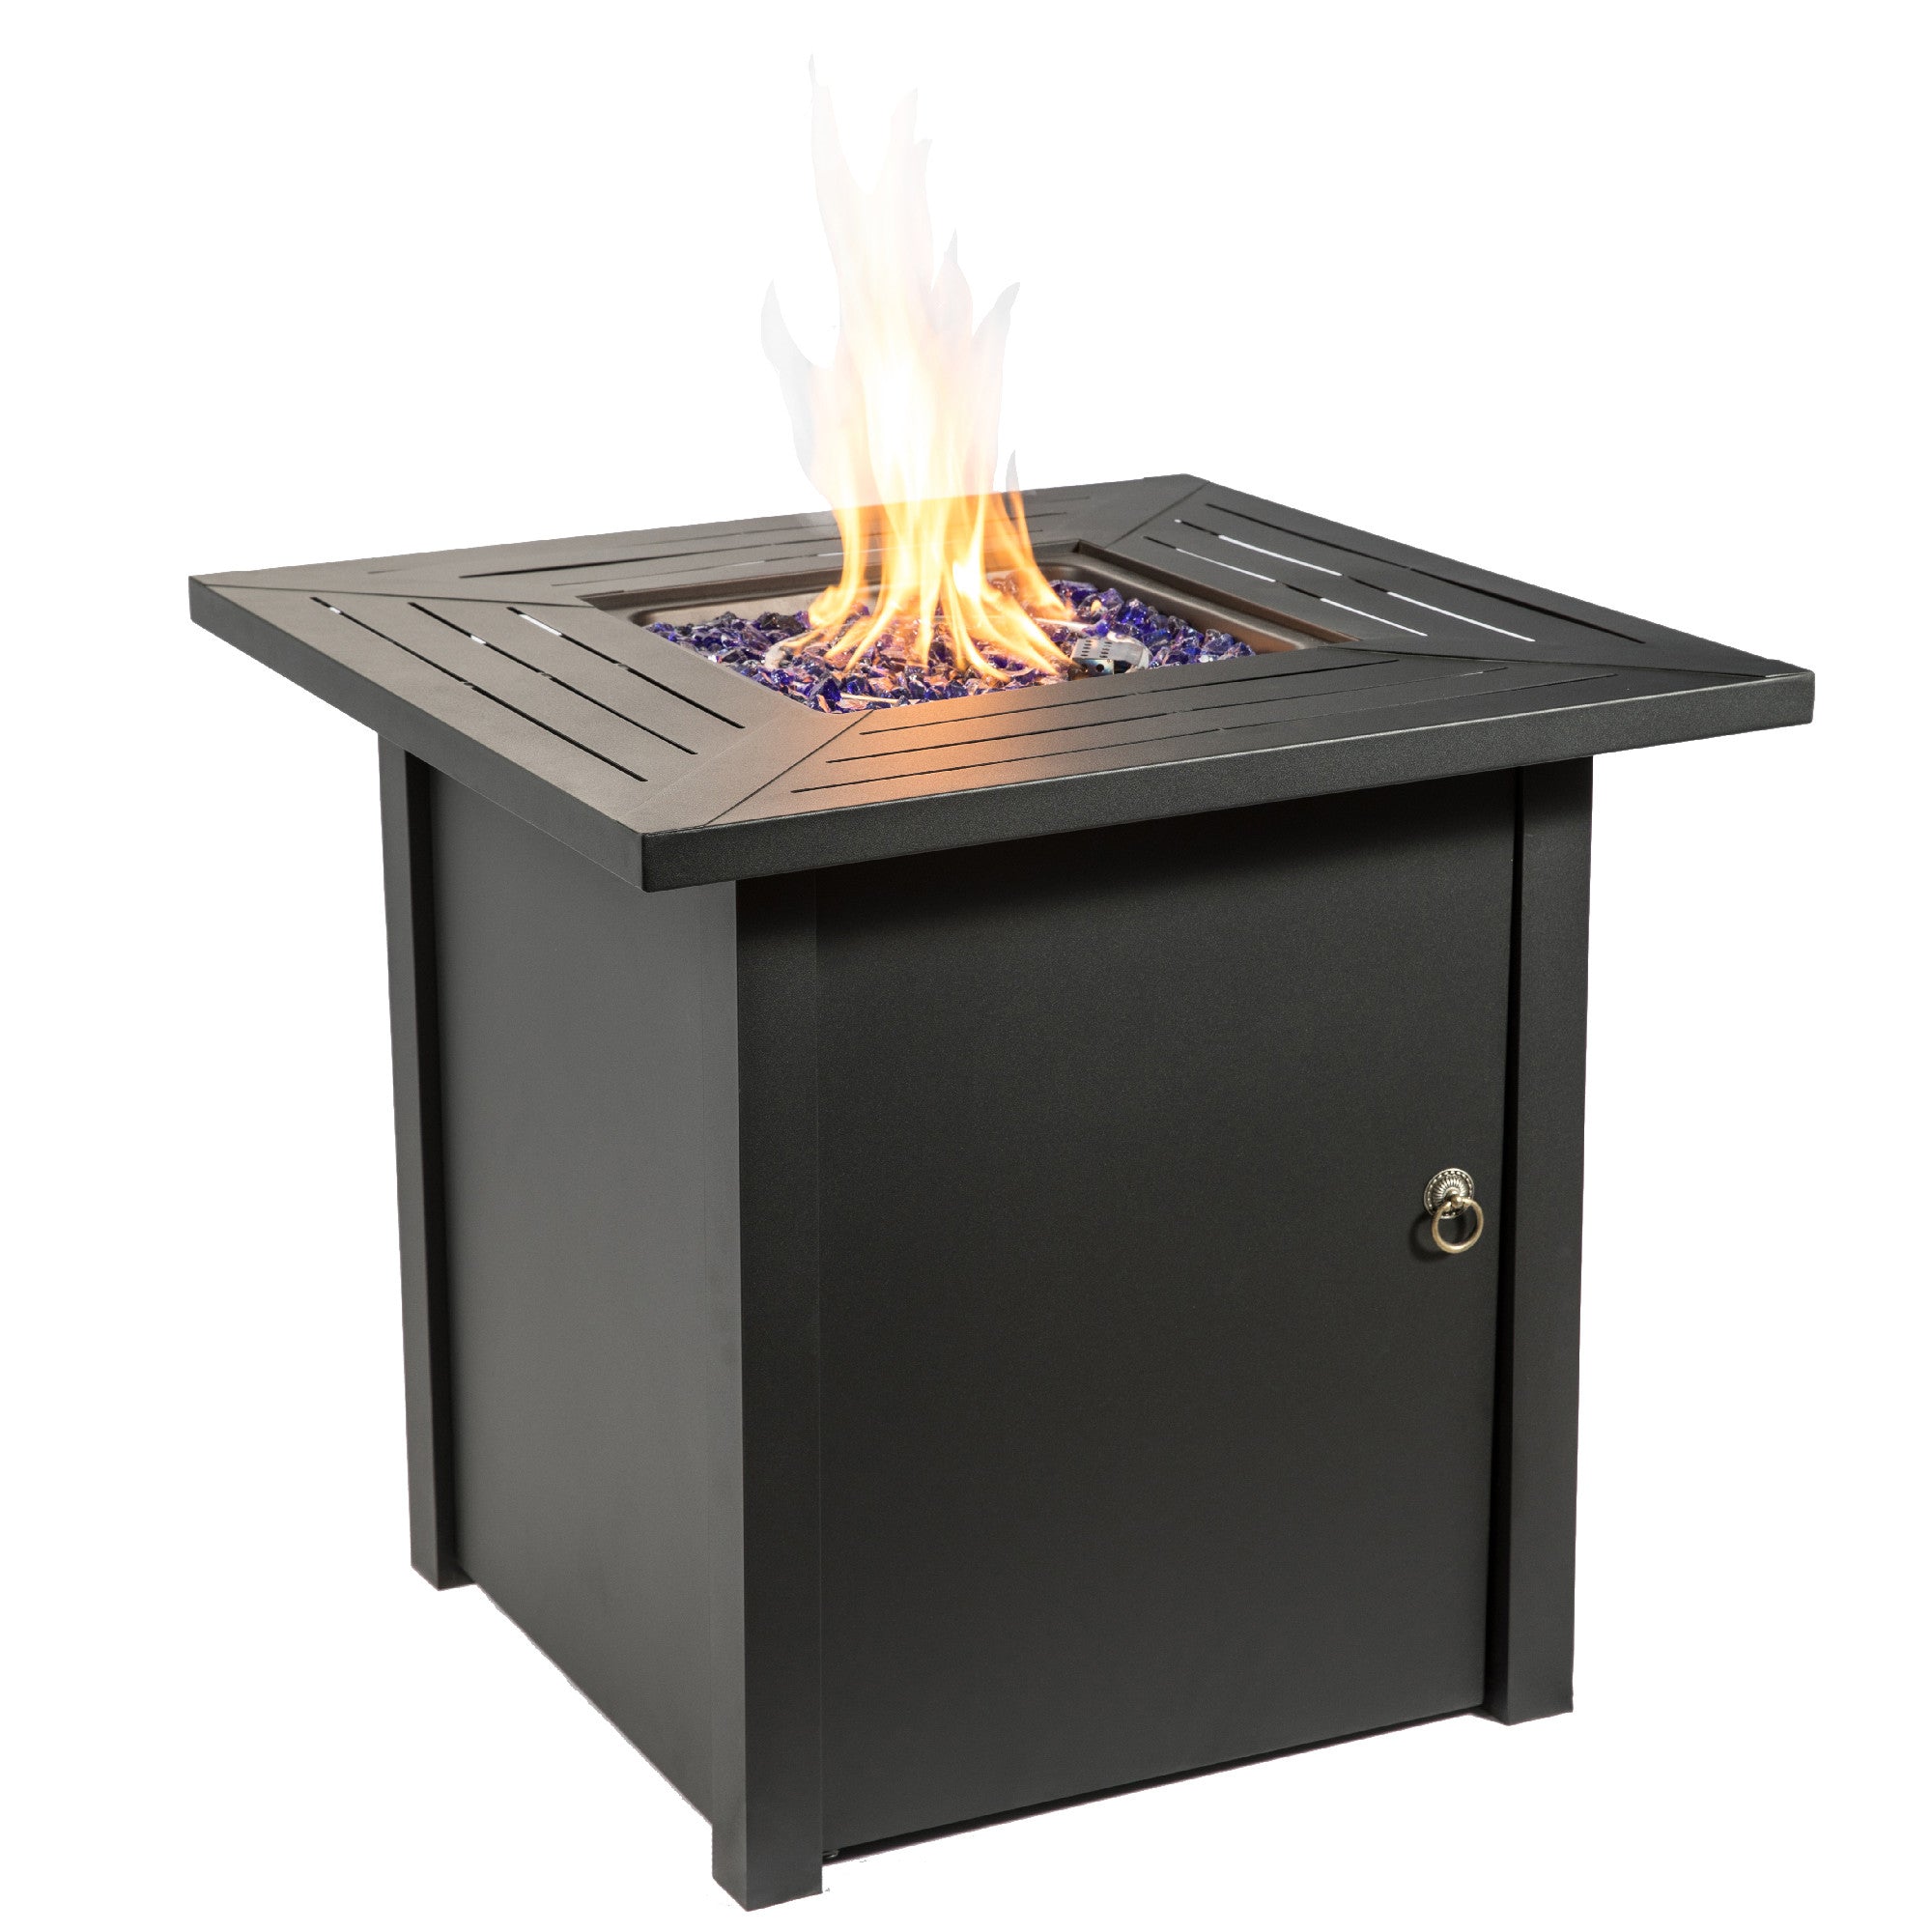 Teamson Home Outdoor Square 30" Propane Gas Fire Pit with Steel Base